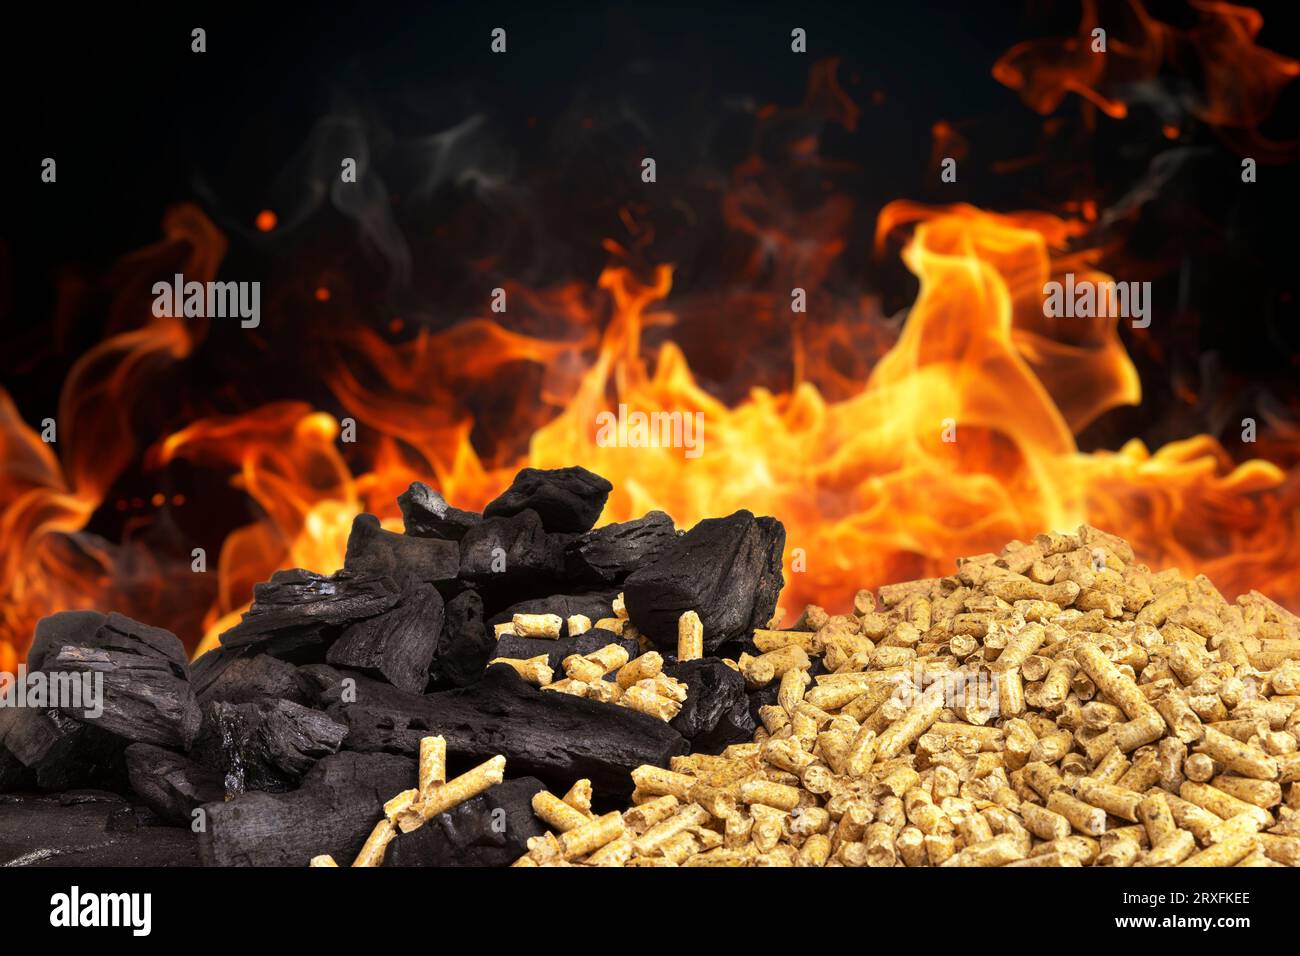 wood pellets and pieces of coal with flames in the background Stock Photo